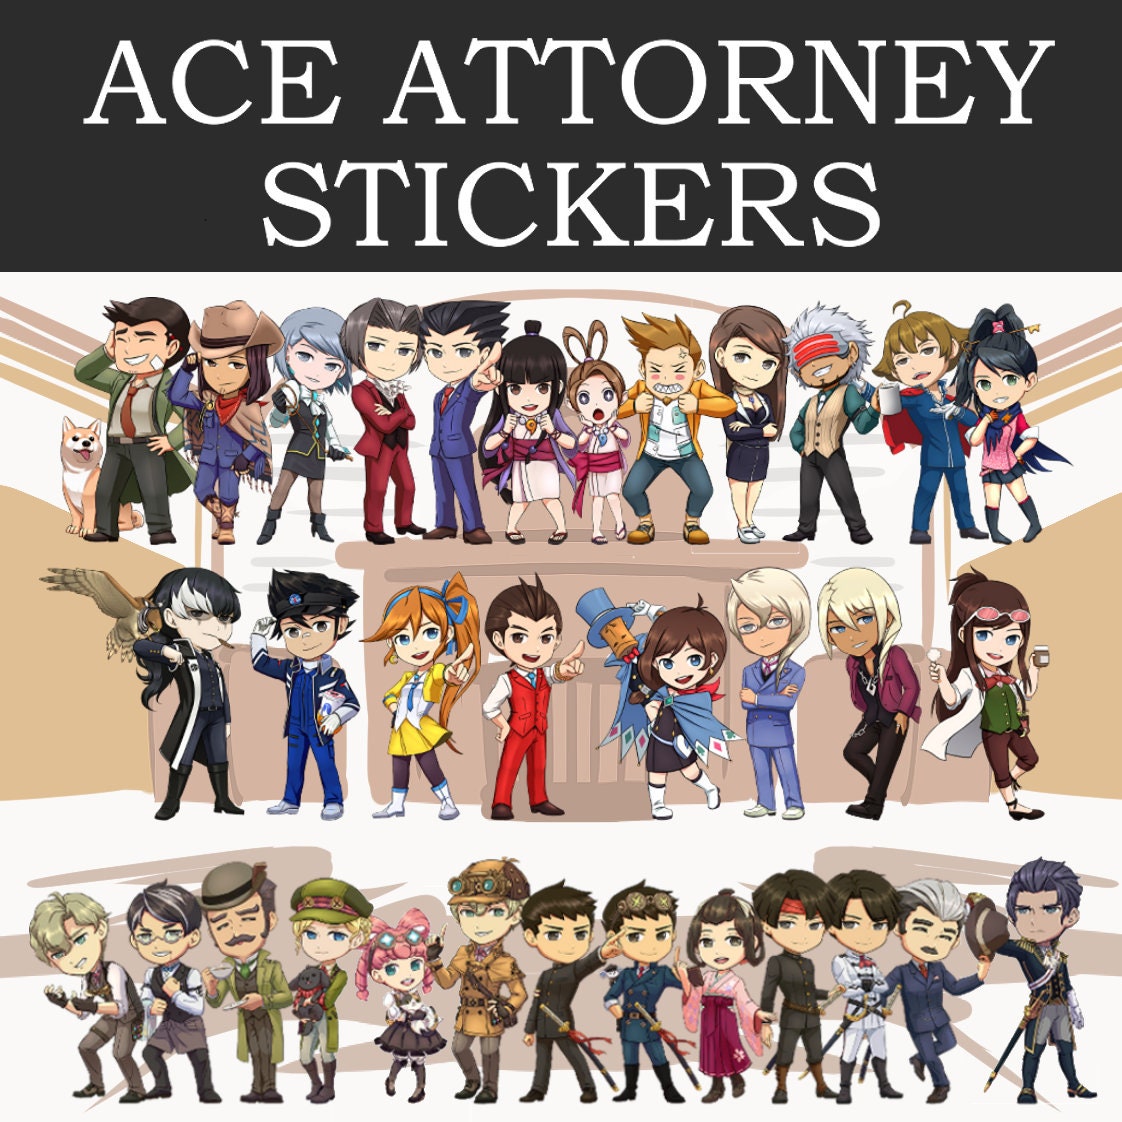 E-rated” Ace Attorney Investigations: Miles Edgeworth cartridge